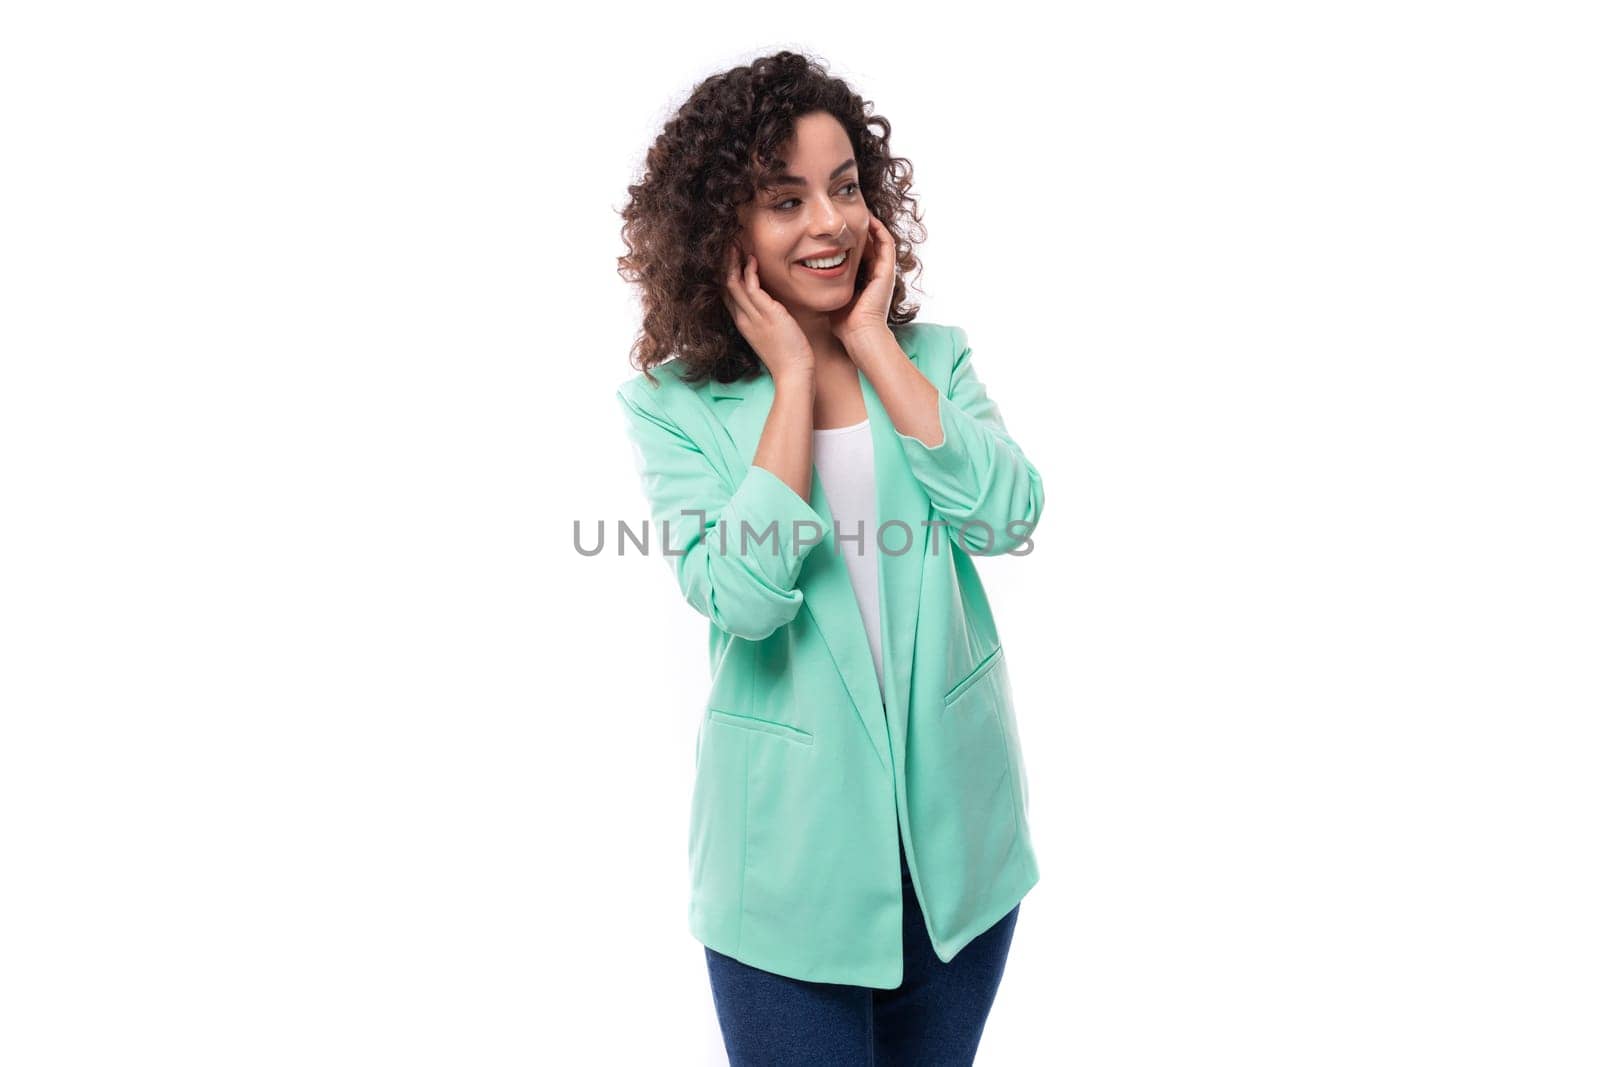 young slim enthusiast successful leader woman with curly black hair on white background.